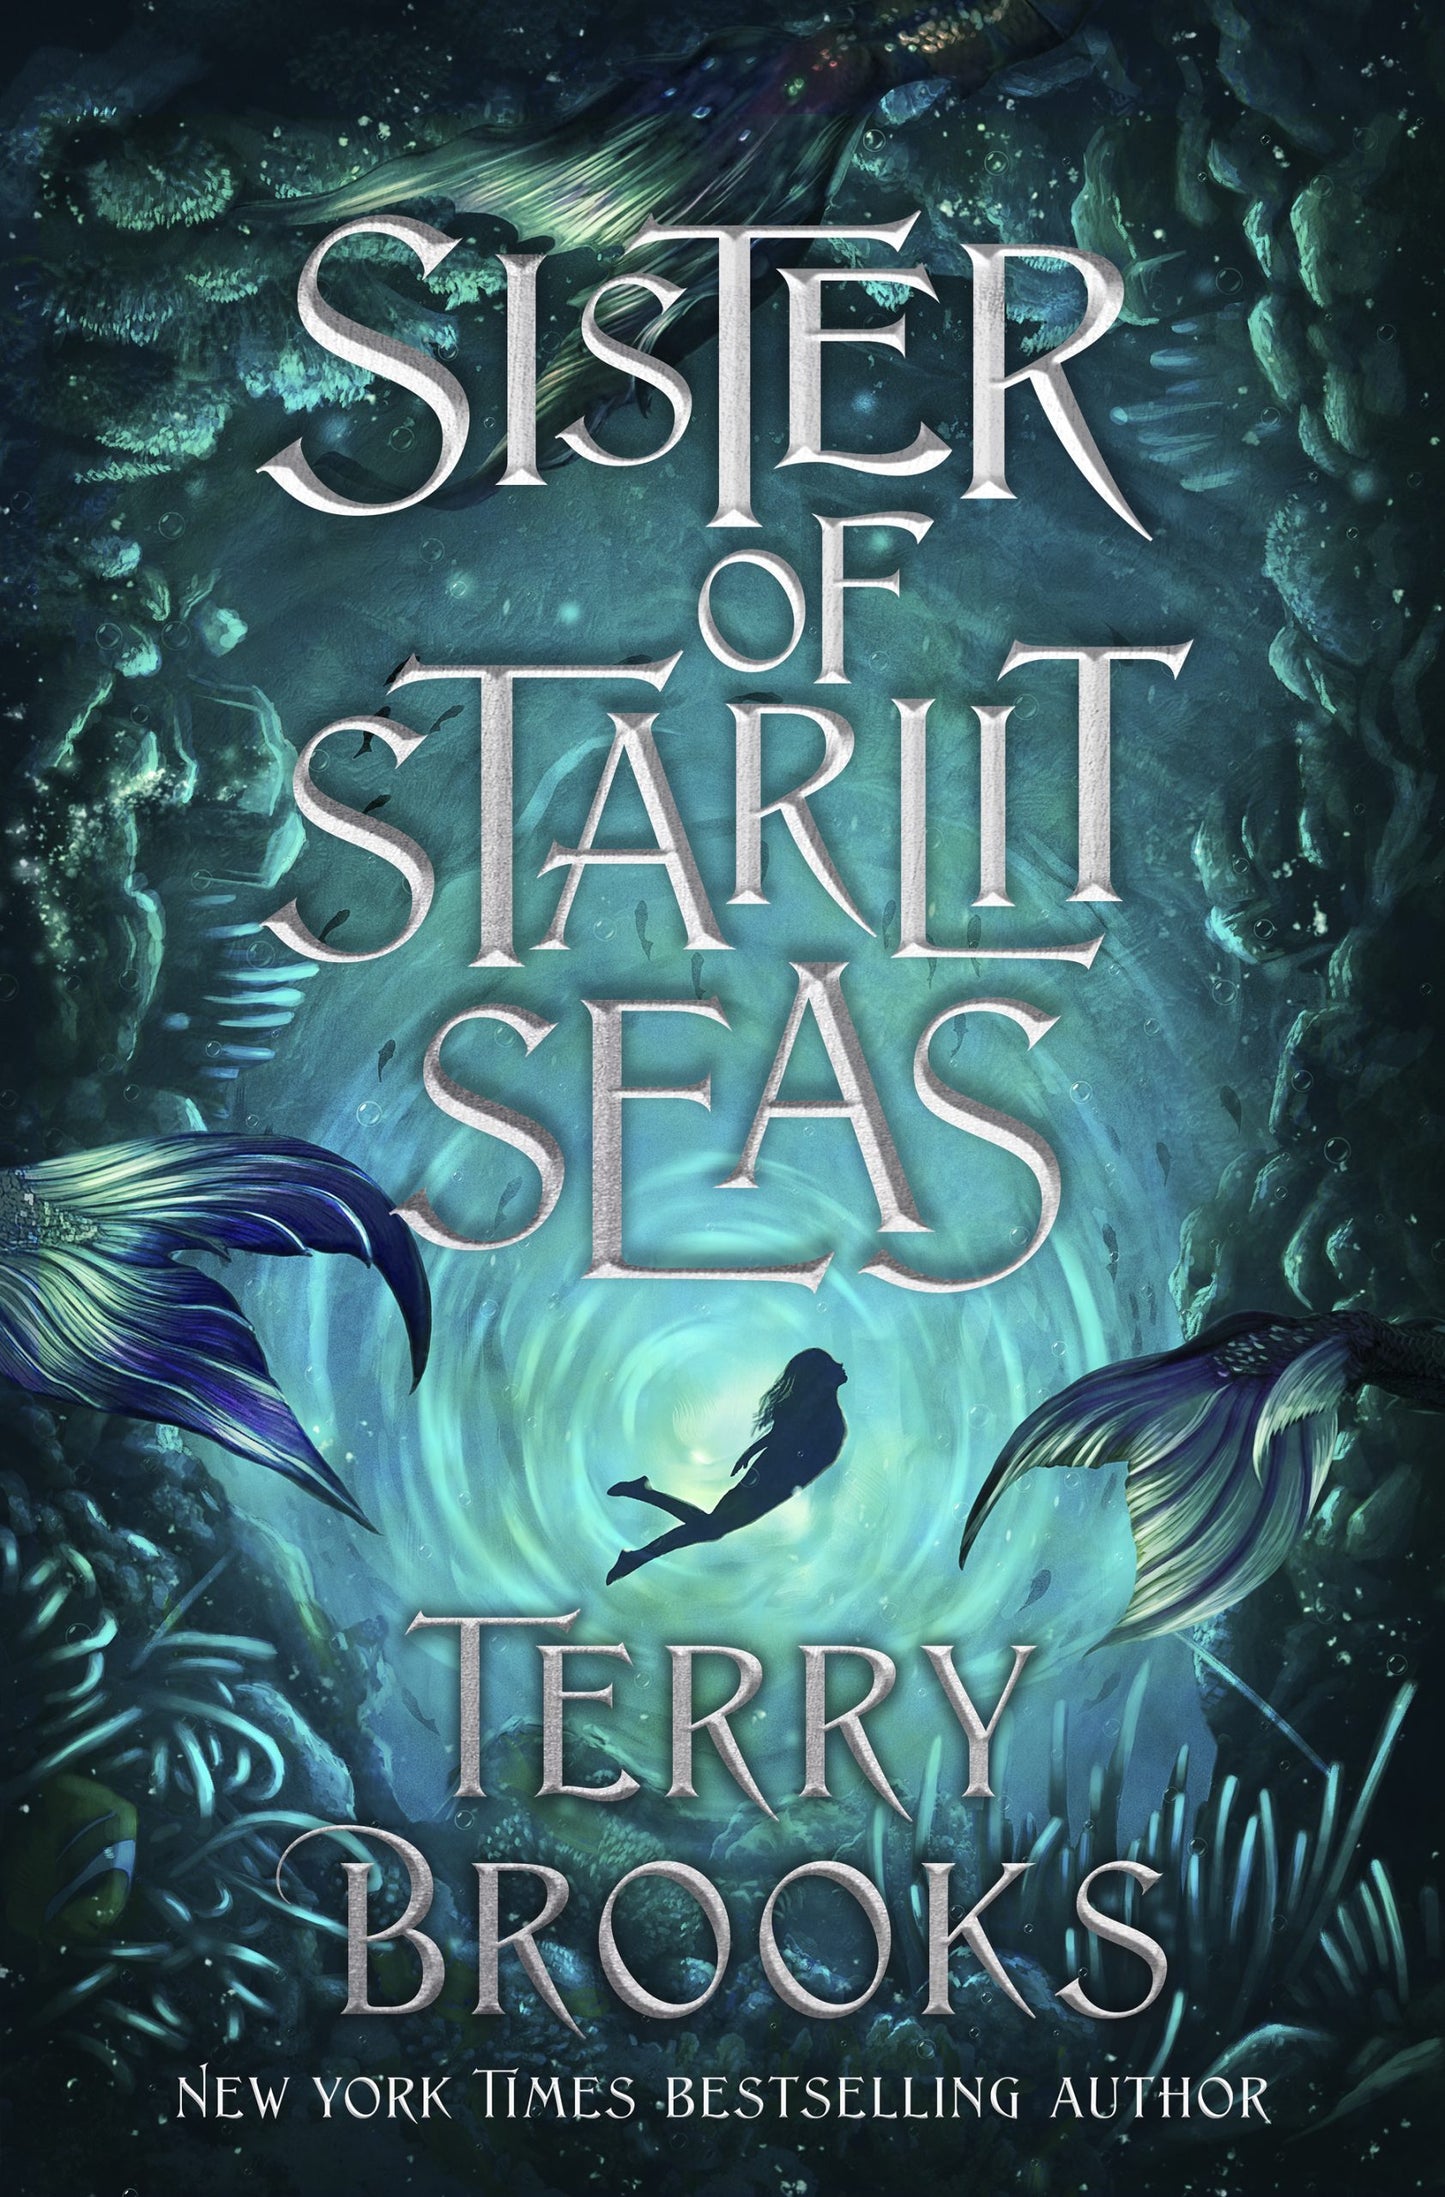 Sister of Starlit Seas by Terry Brooks